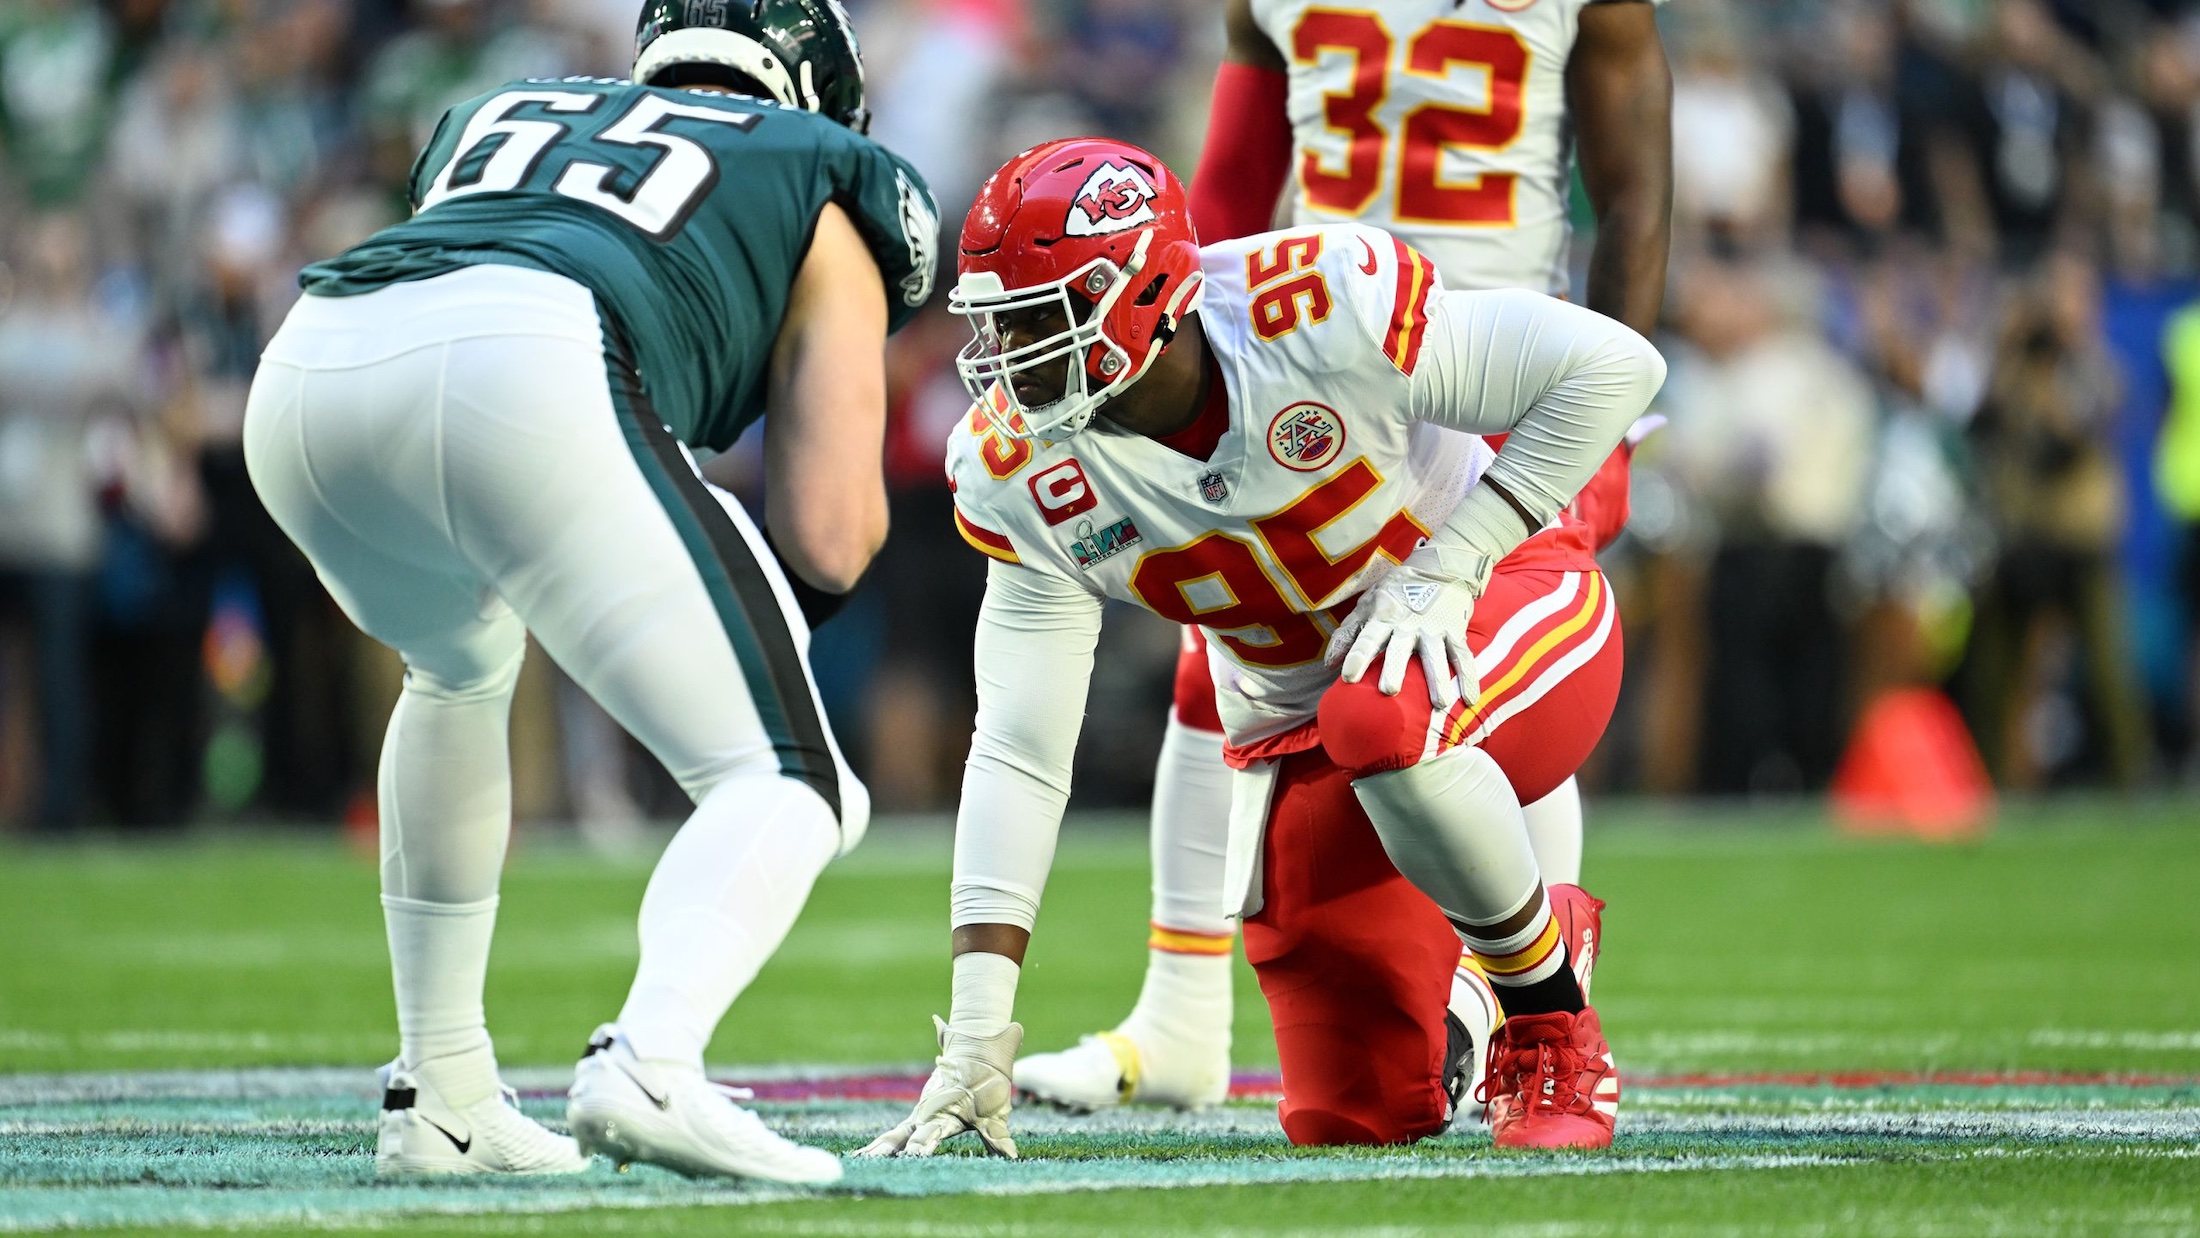 At Chiefs camp, Andrew Wylie, Trey Smith are focused on specific